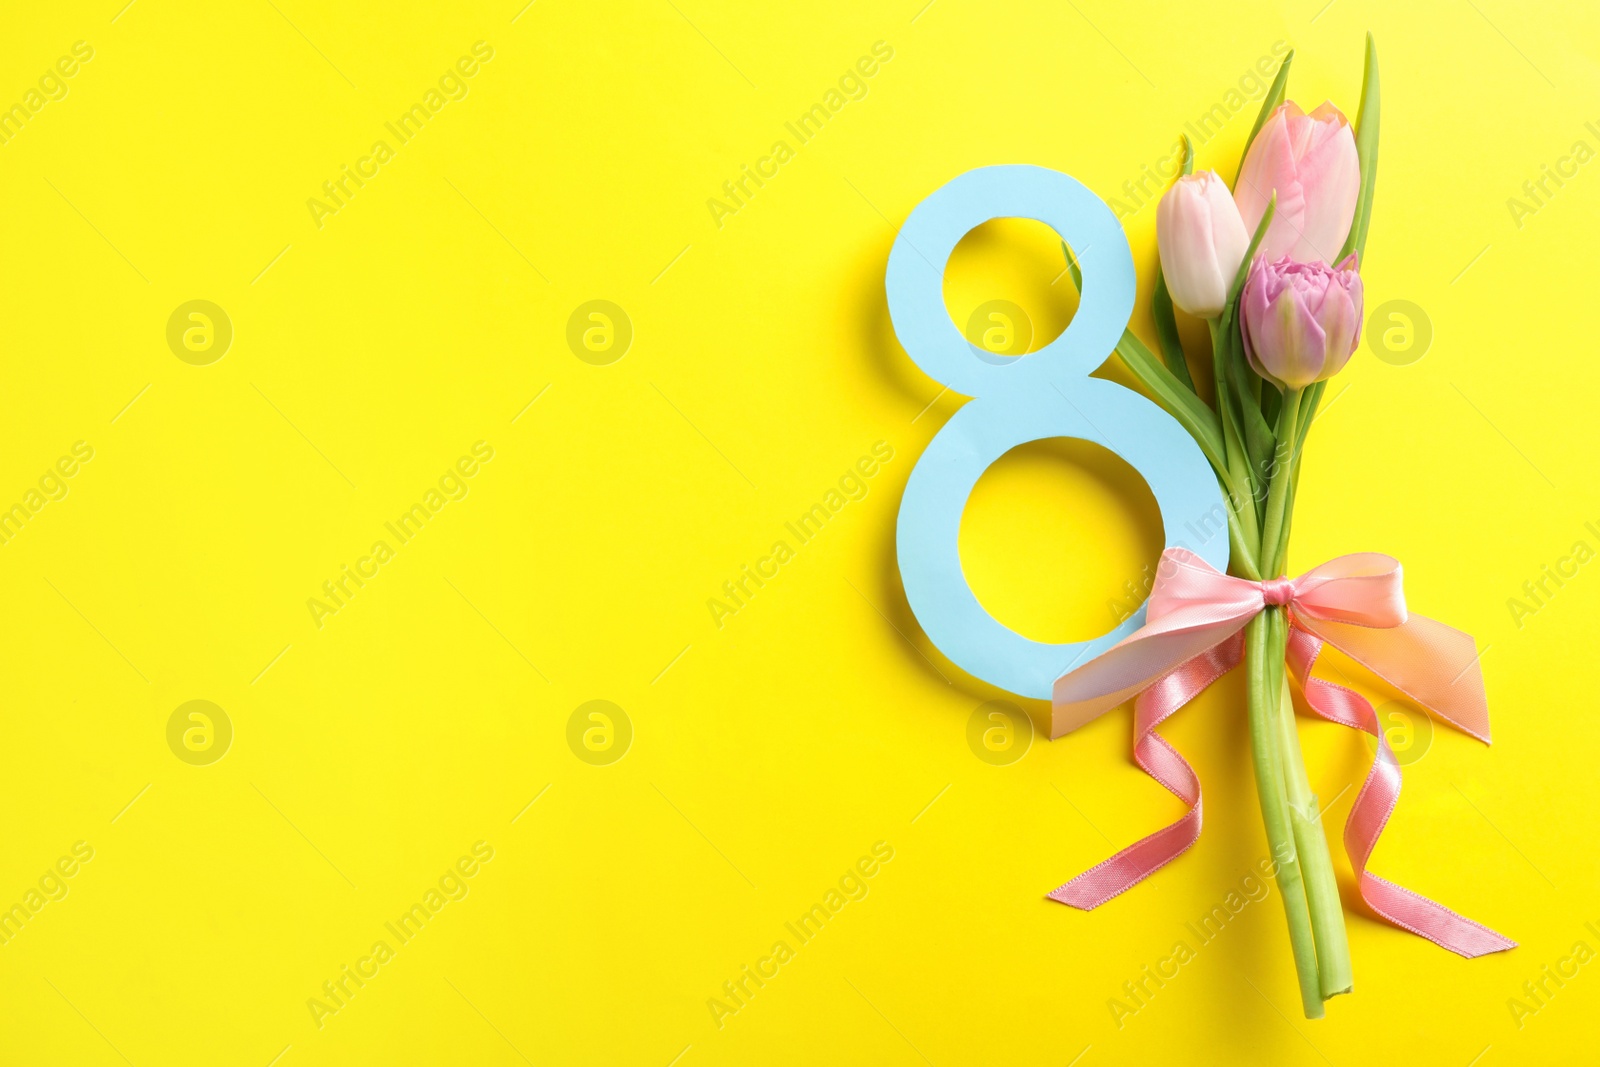 Photo of 8 March card design with tulips and space for text on yellow background, flat lay. International Women's Day